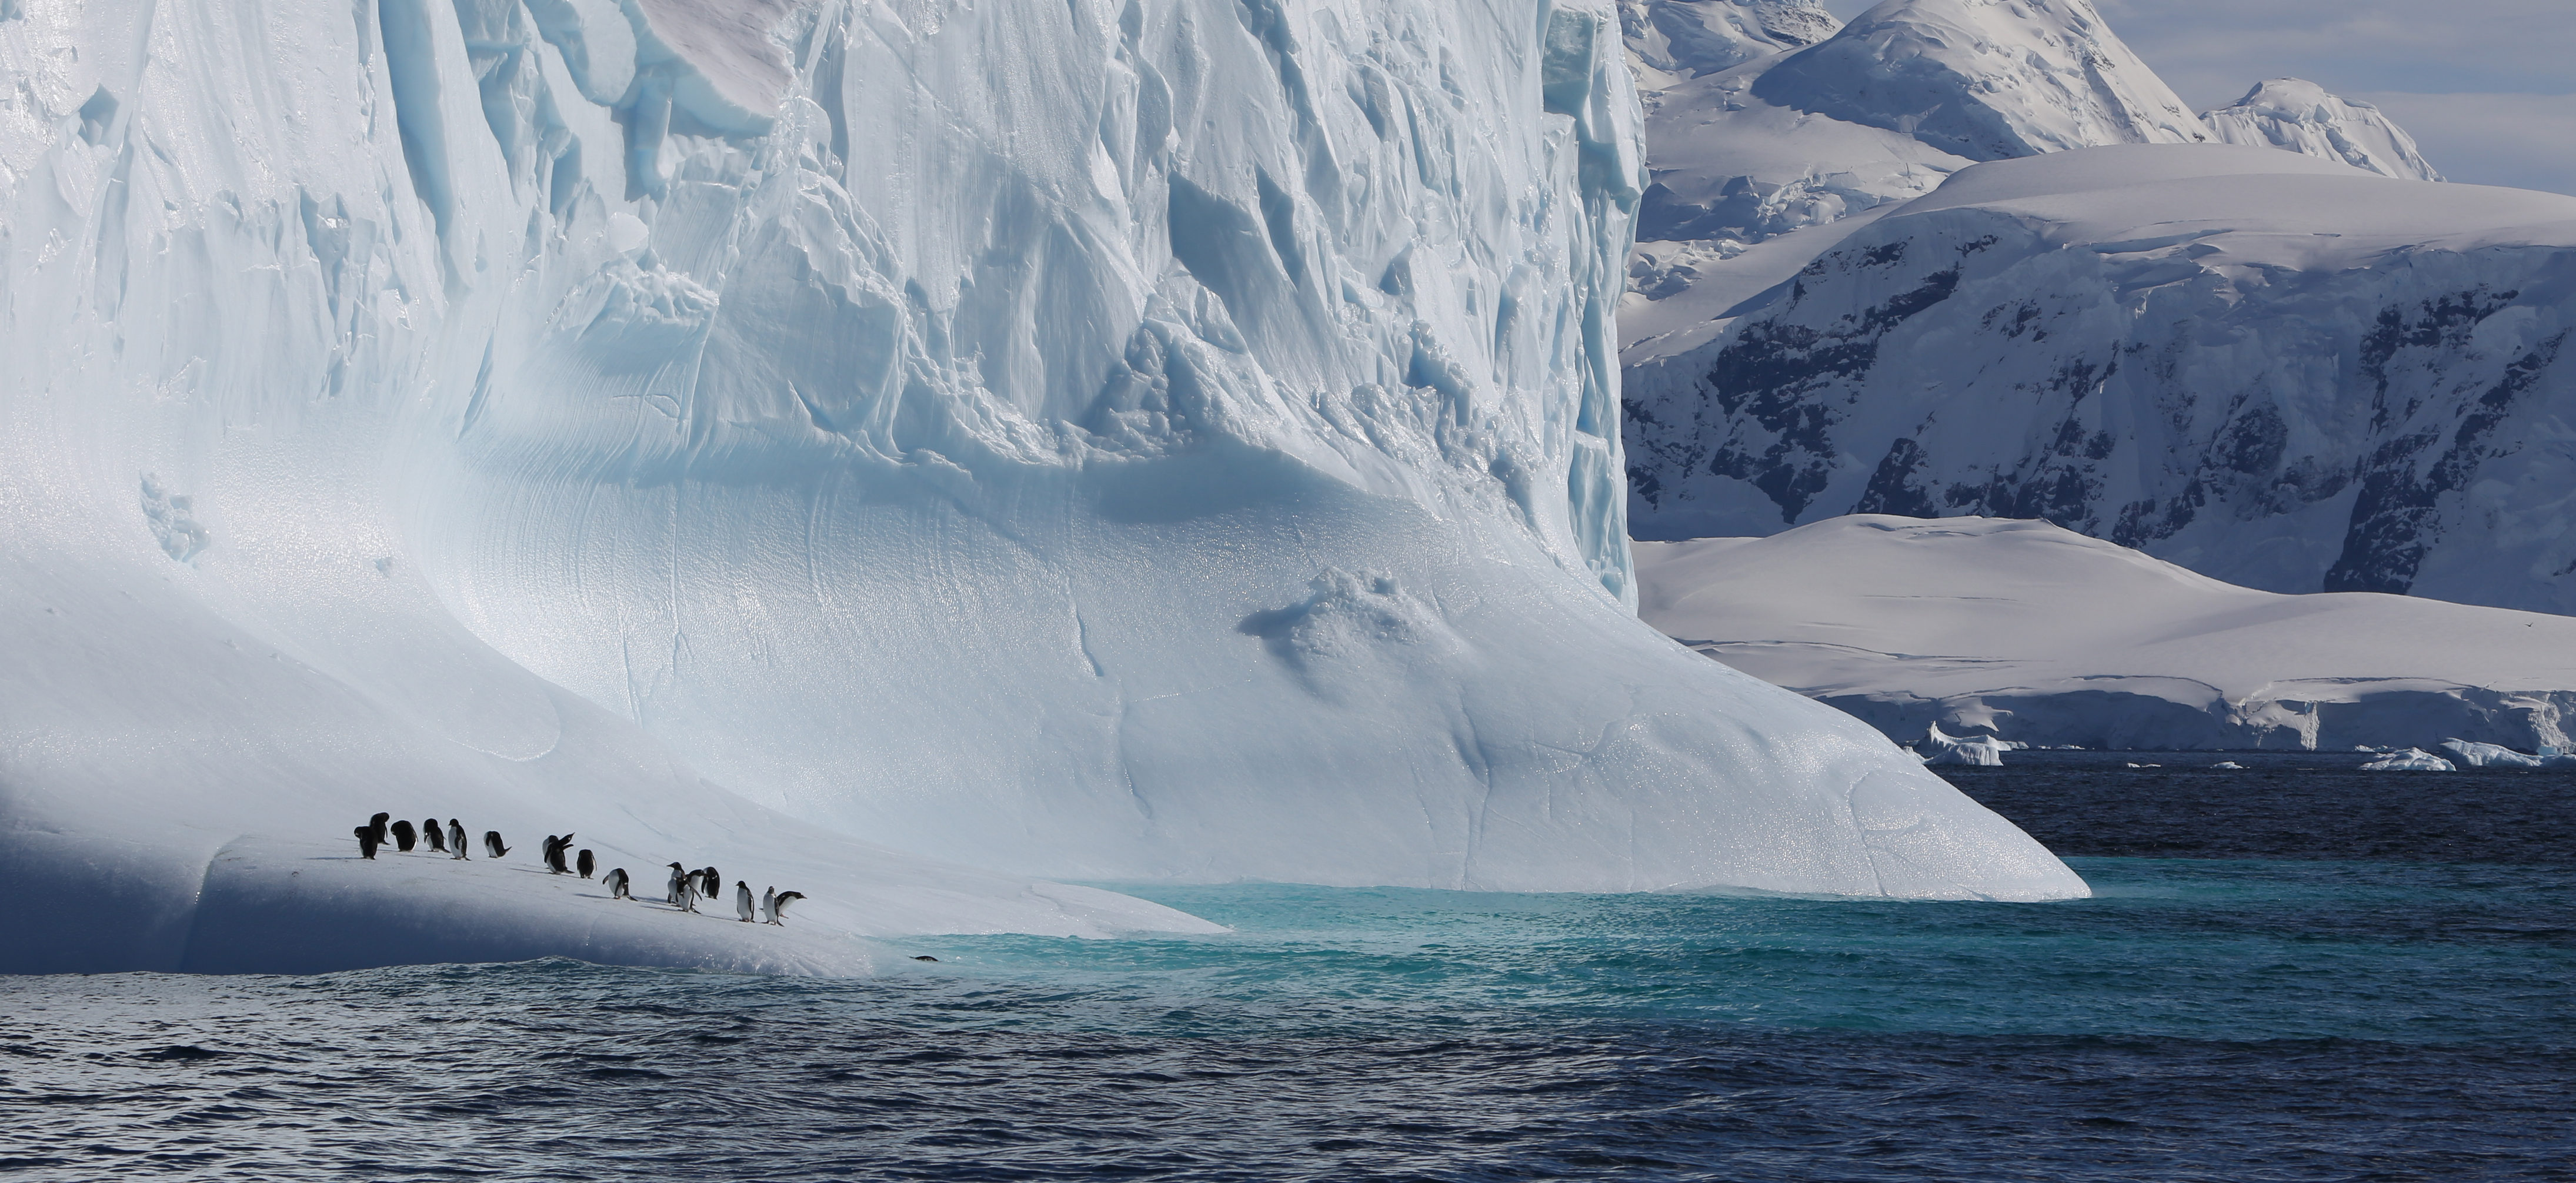 Gentoo penguins taking a rest from fishing on an iceberg in Antarctic Peninsula.